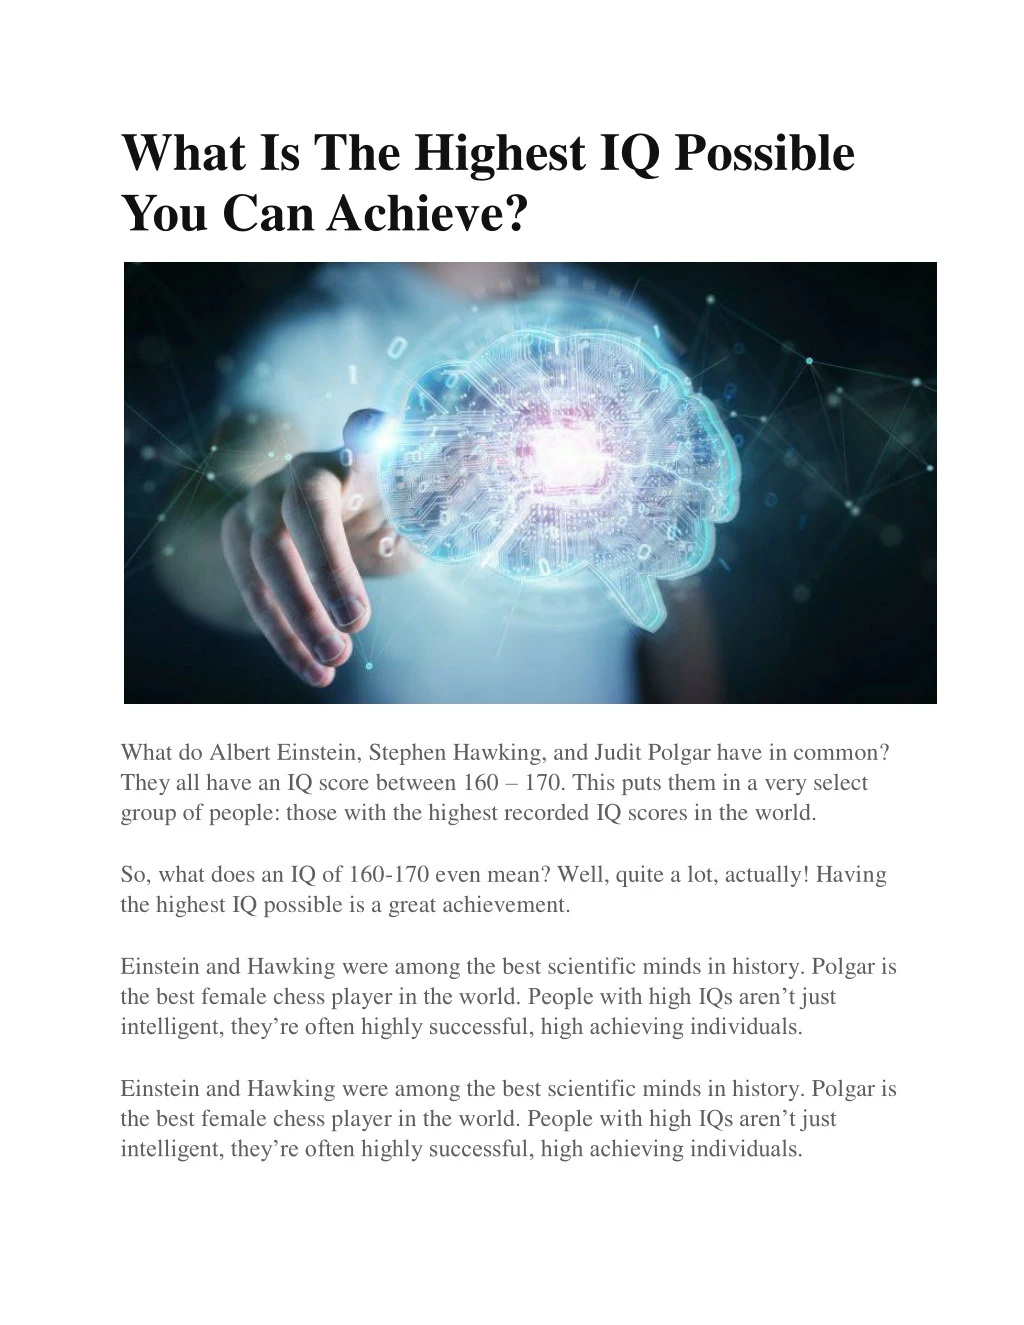 what is the highest iq possible you can achieve